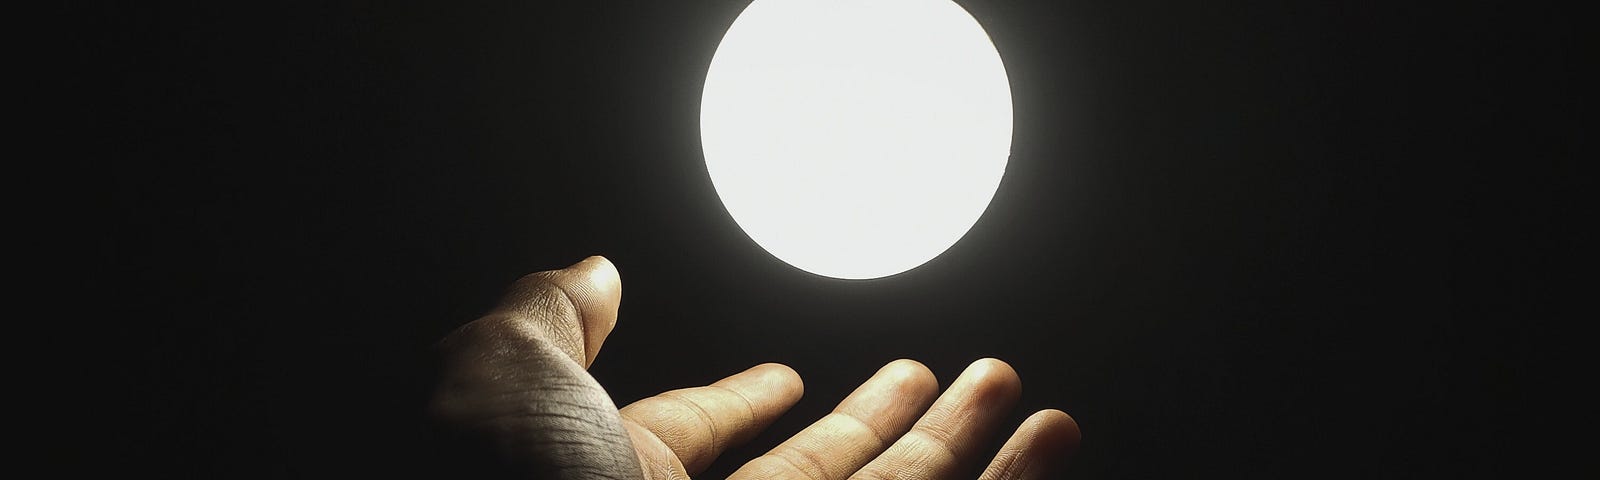 Hand holding the moon